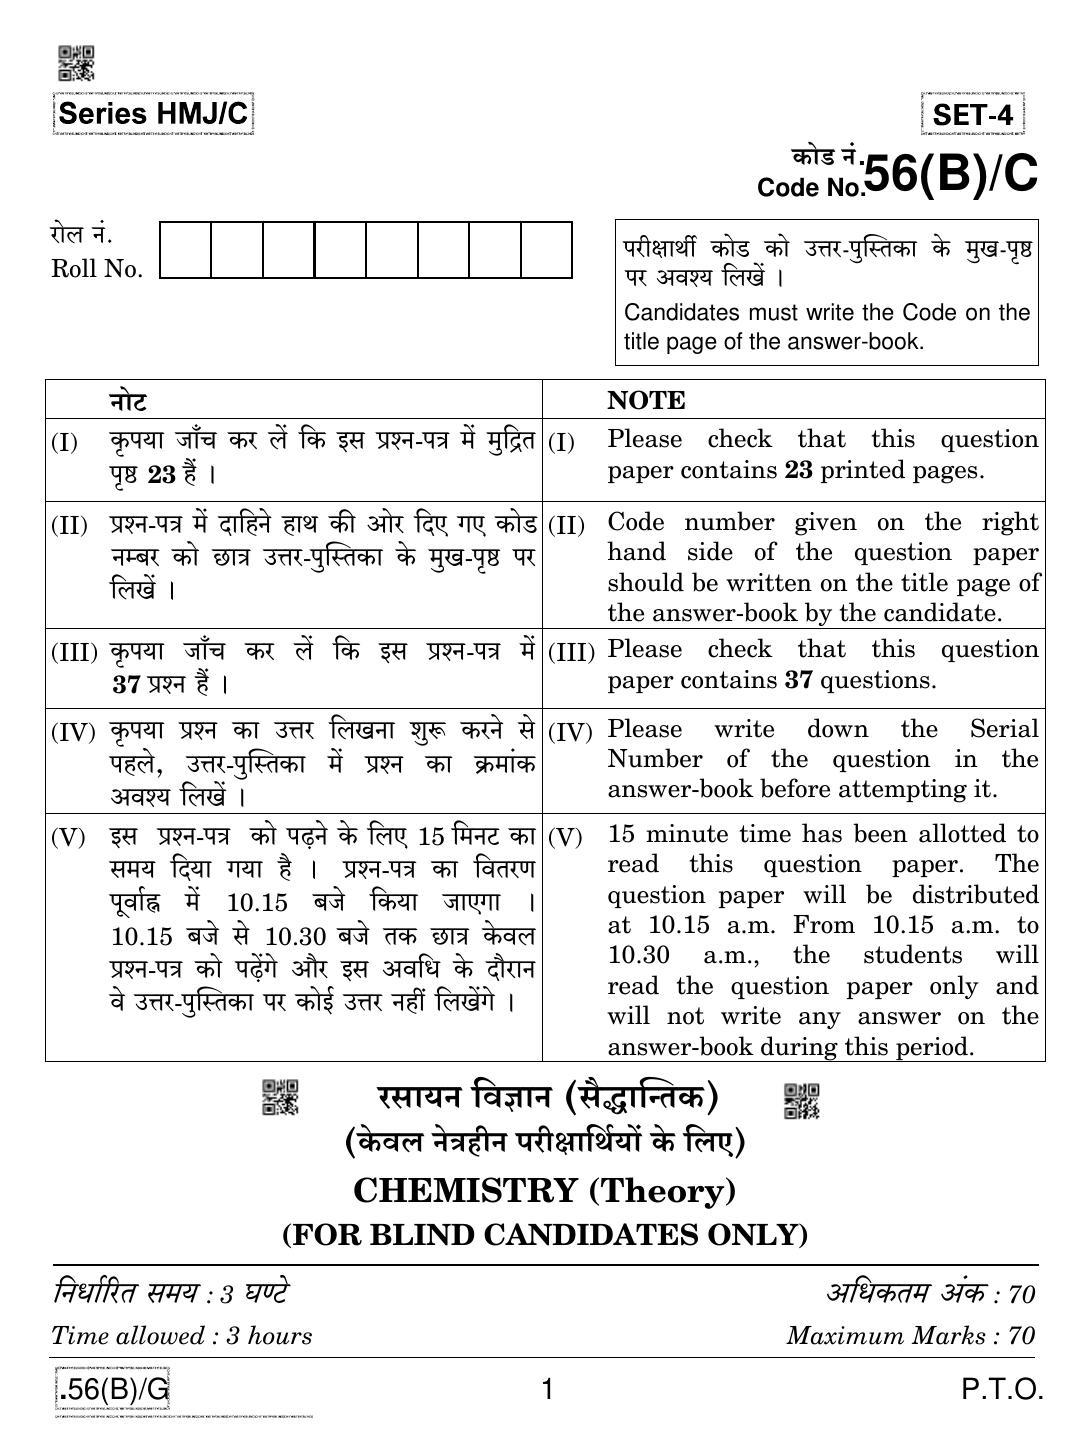 CBSE Class 12 56(B)-C - Chemistry For Blind Candidates 2020 Compartment Question Paper - Page 1